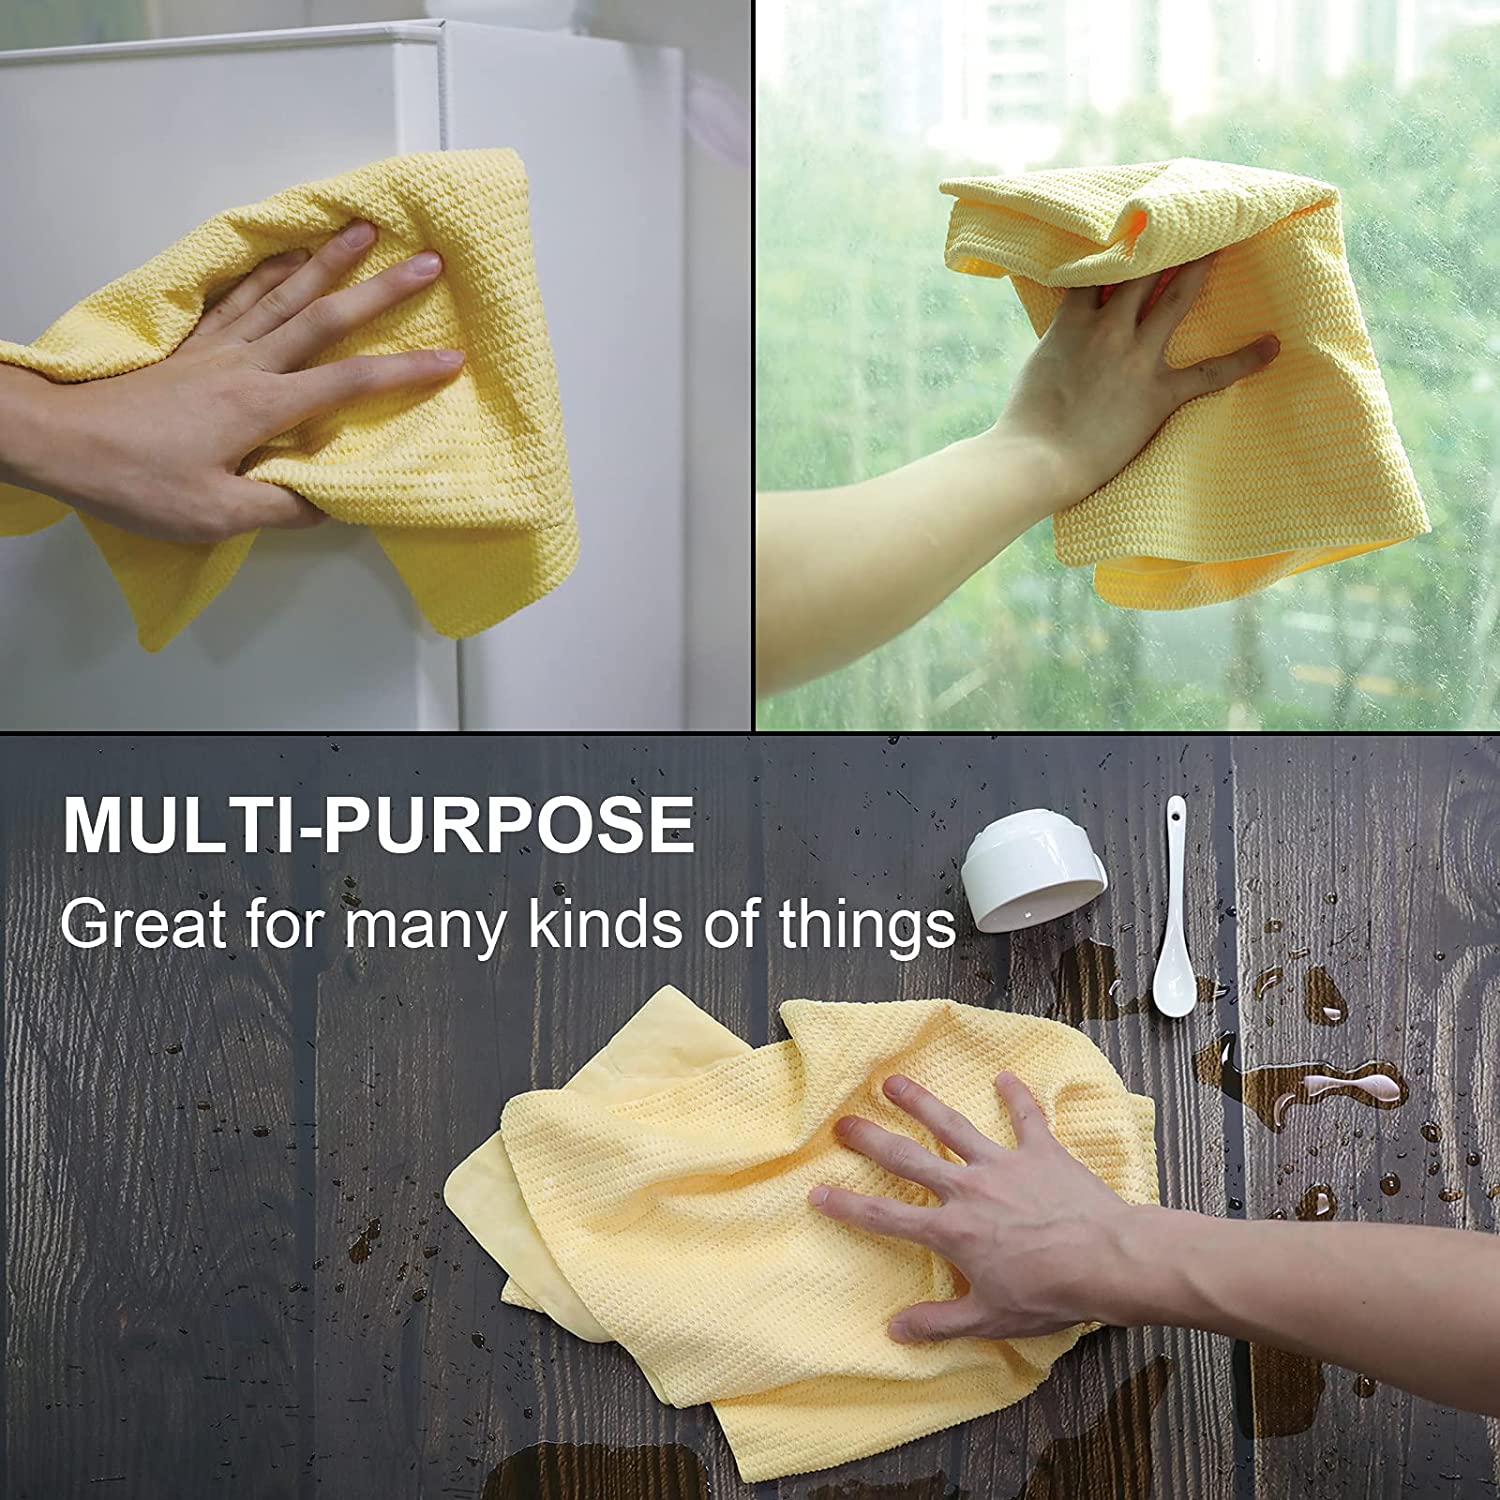 The Original Super Absorbent Multi-Purpose Cleaning Shammy (Chamois) Towel  Cloth, Machine Washable, Will Not Scratch, Orange (6)